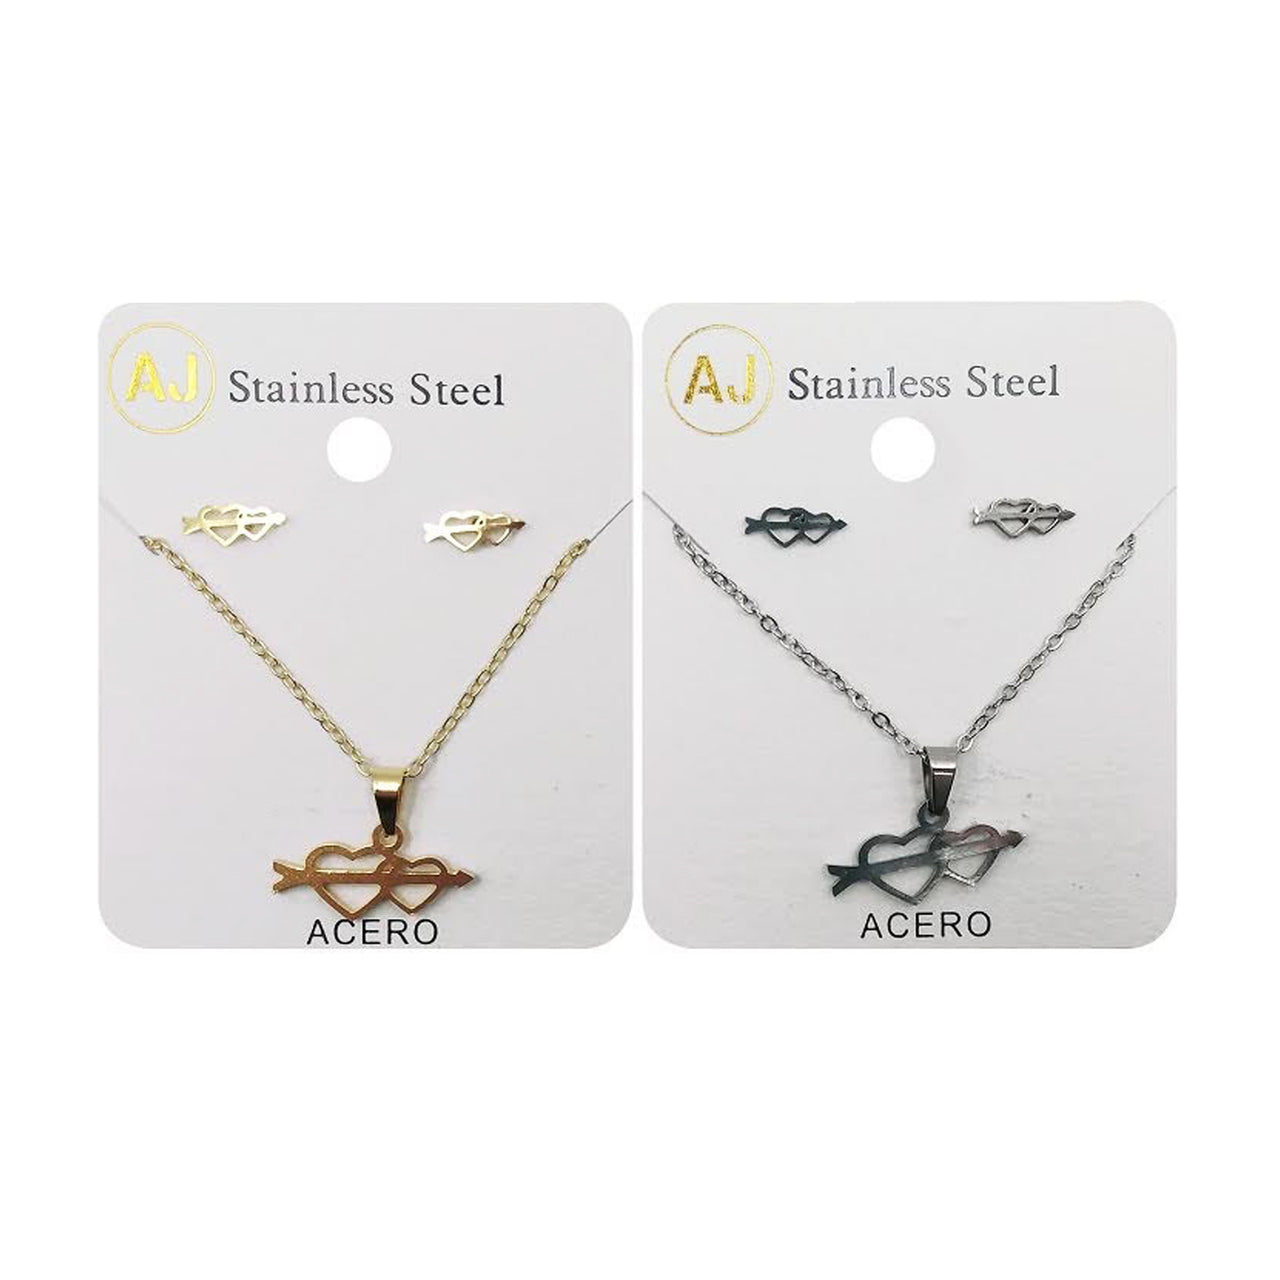 AJ-NSS1165 Stainless Steel Fashion Necklace : 1 DZ